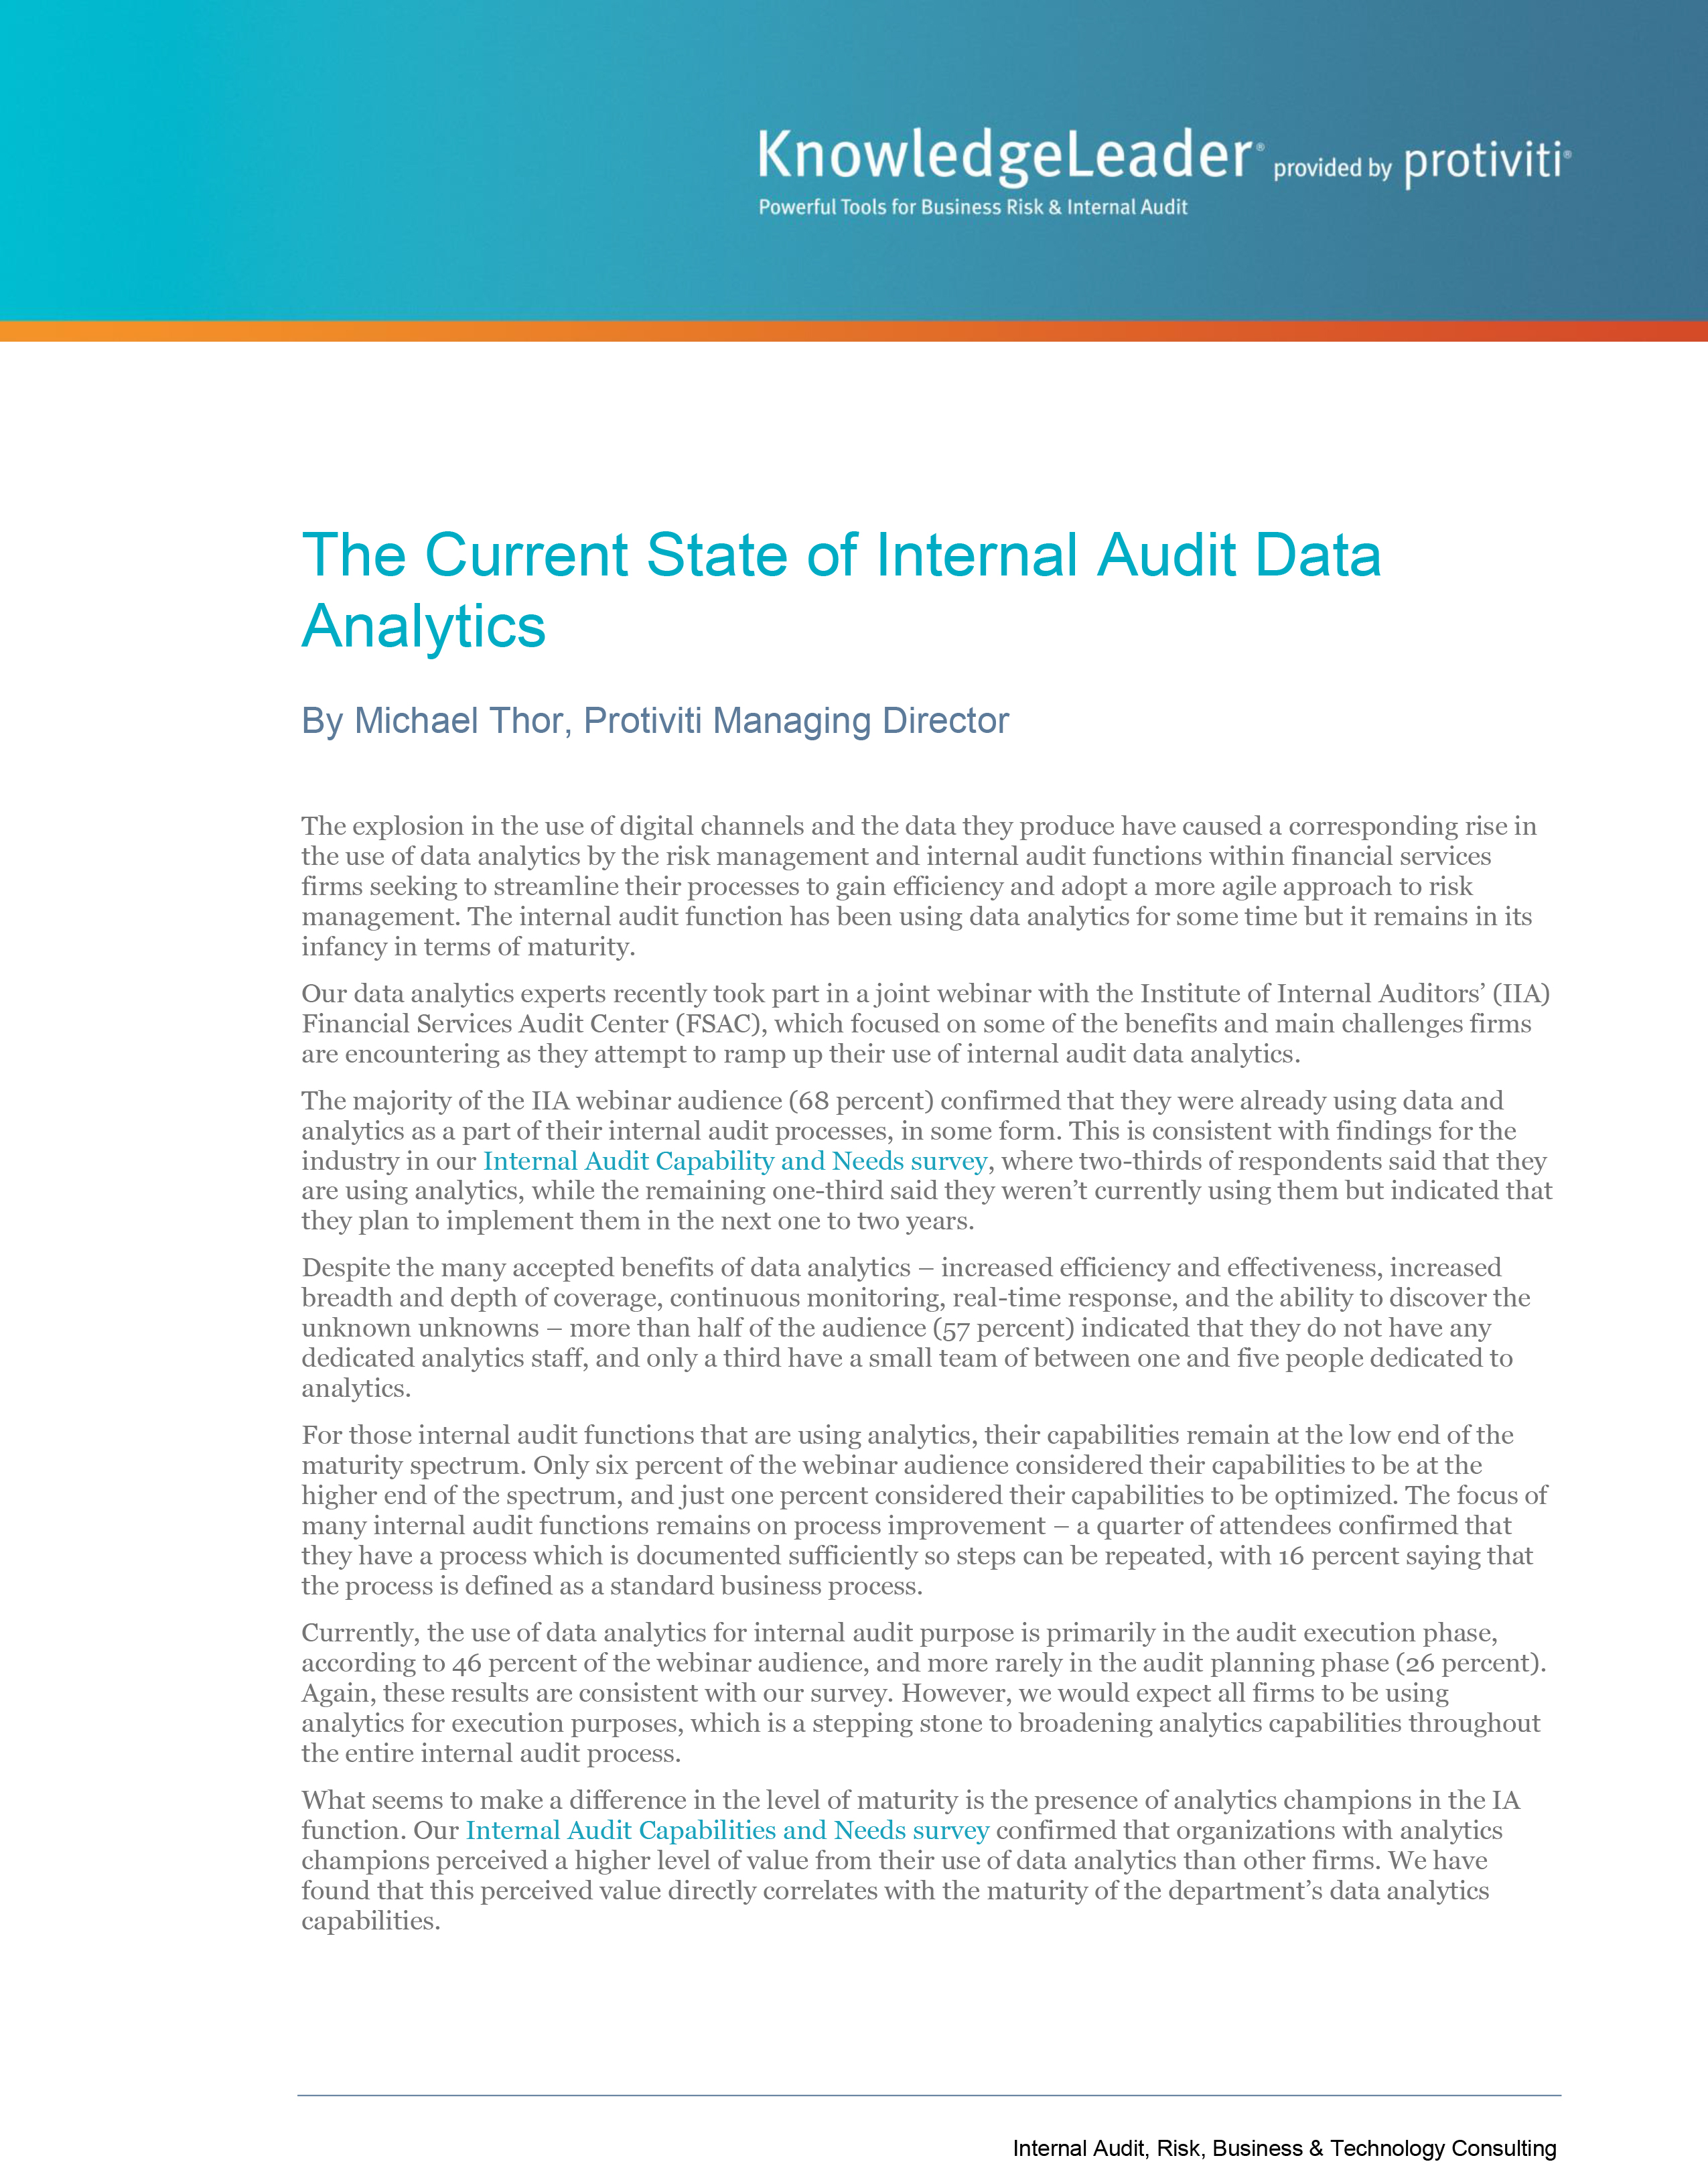 Screenshot of the first page of The Current State of Internal Audit Data Analytics